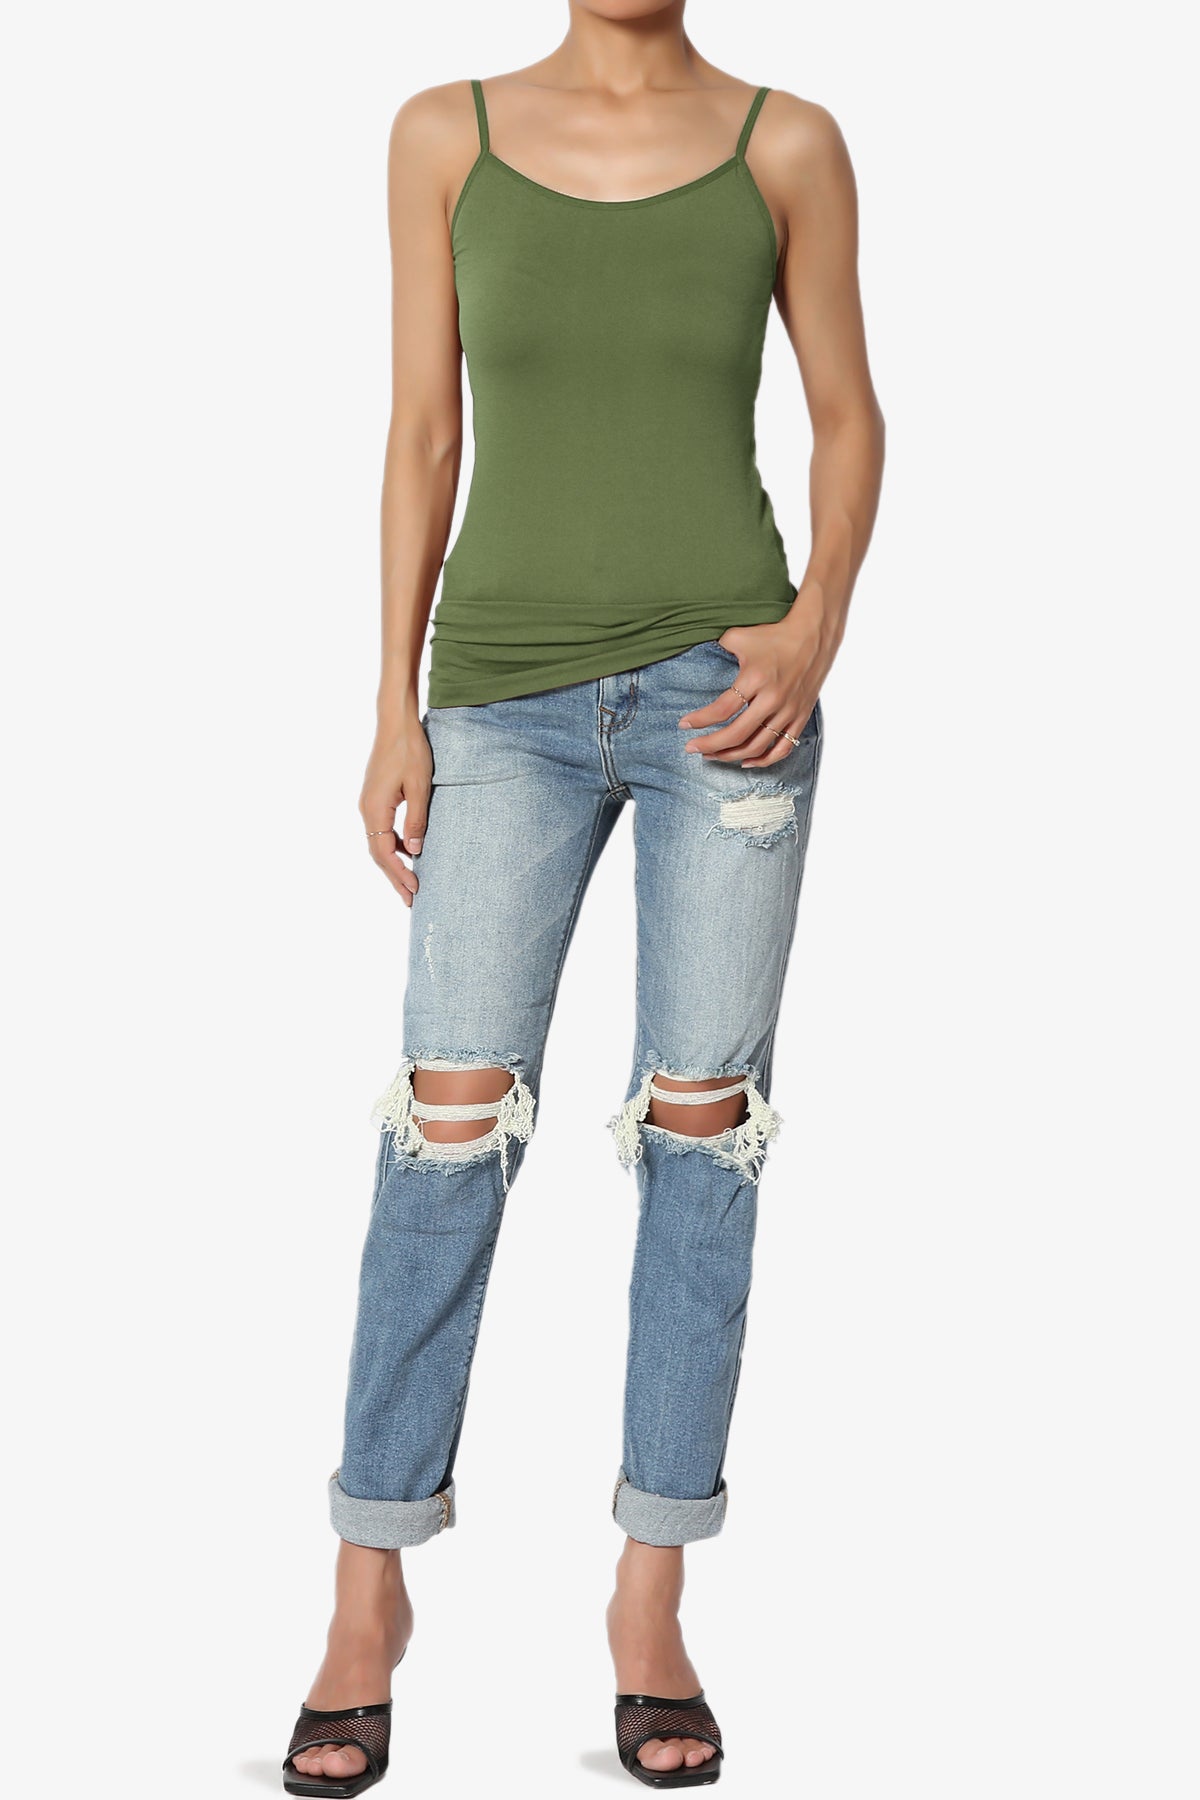 Load image into Gallery viewer, Himari Seamless Camisole Top ASH OLIVE_6
